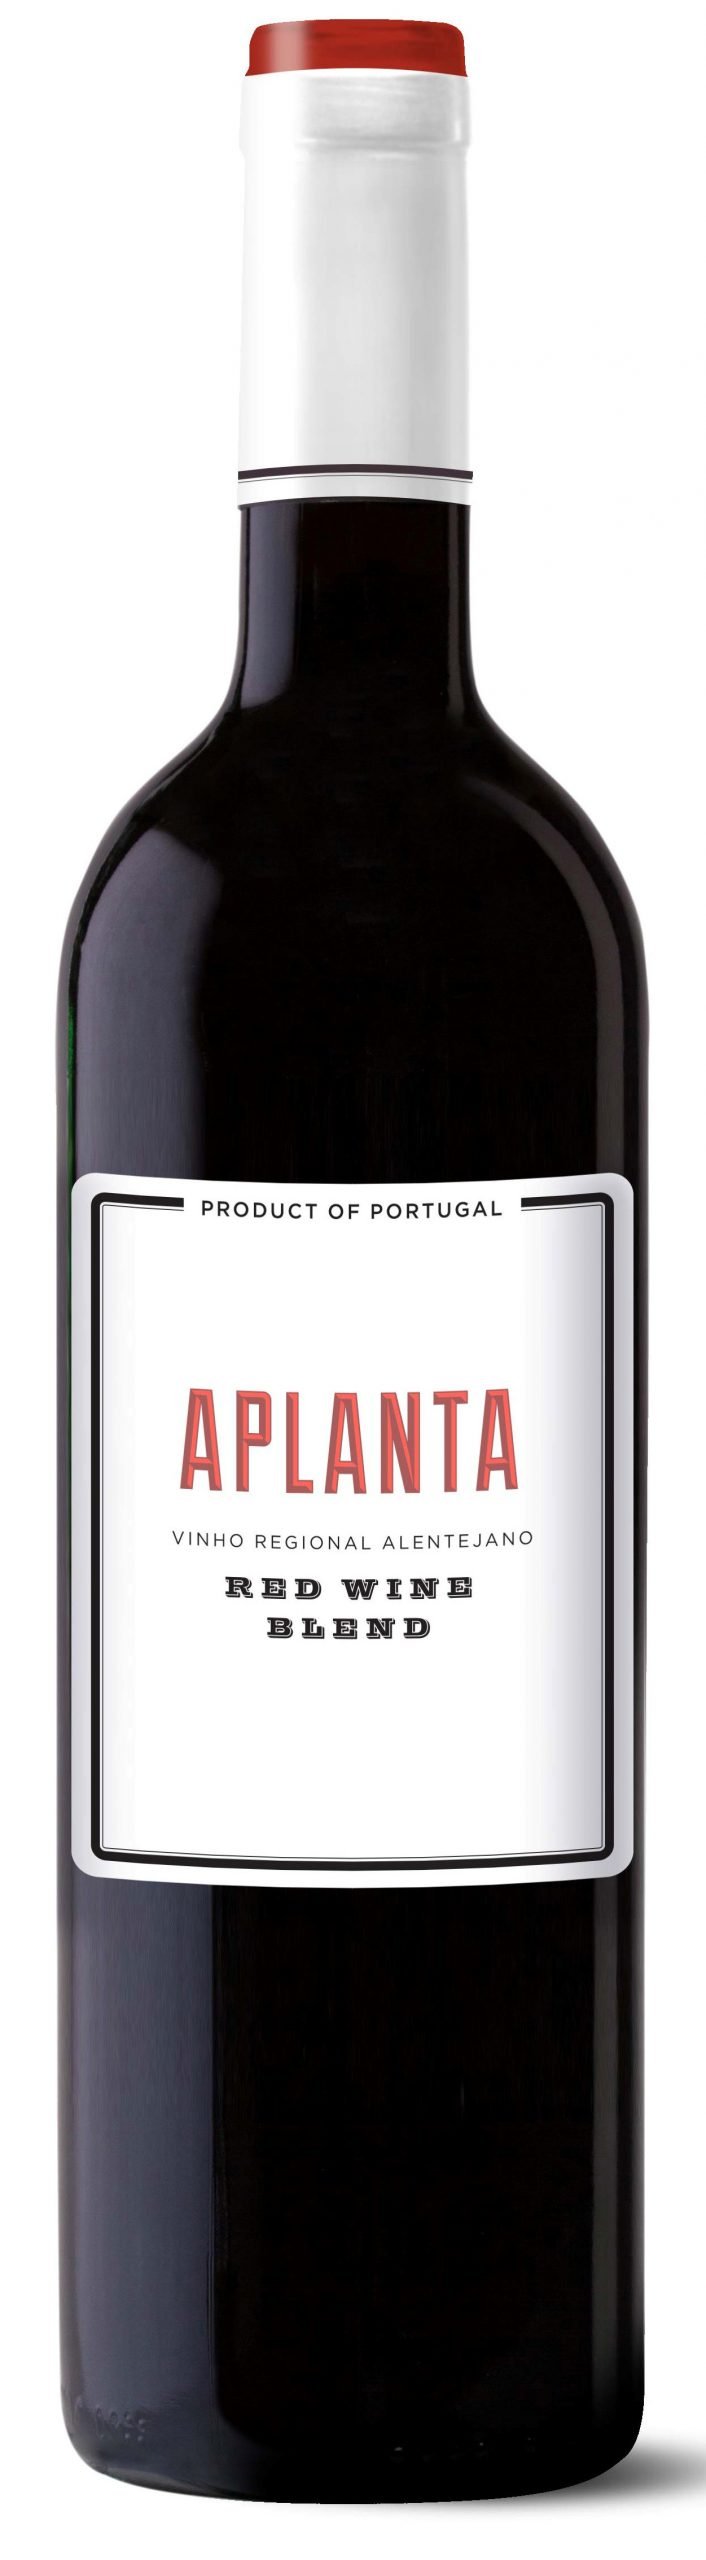 Wine Review: Aplanta Red Blend 2018